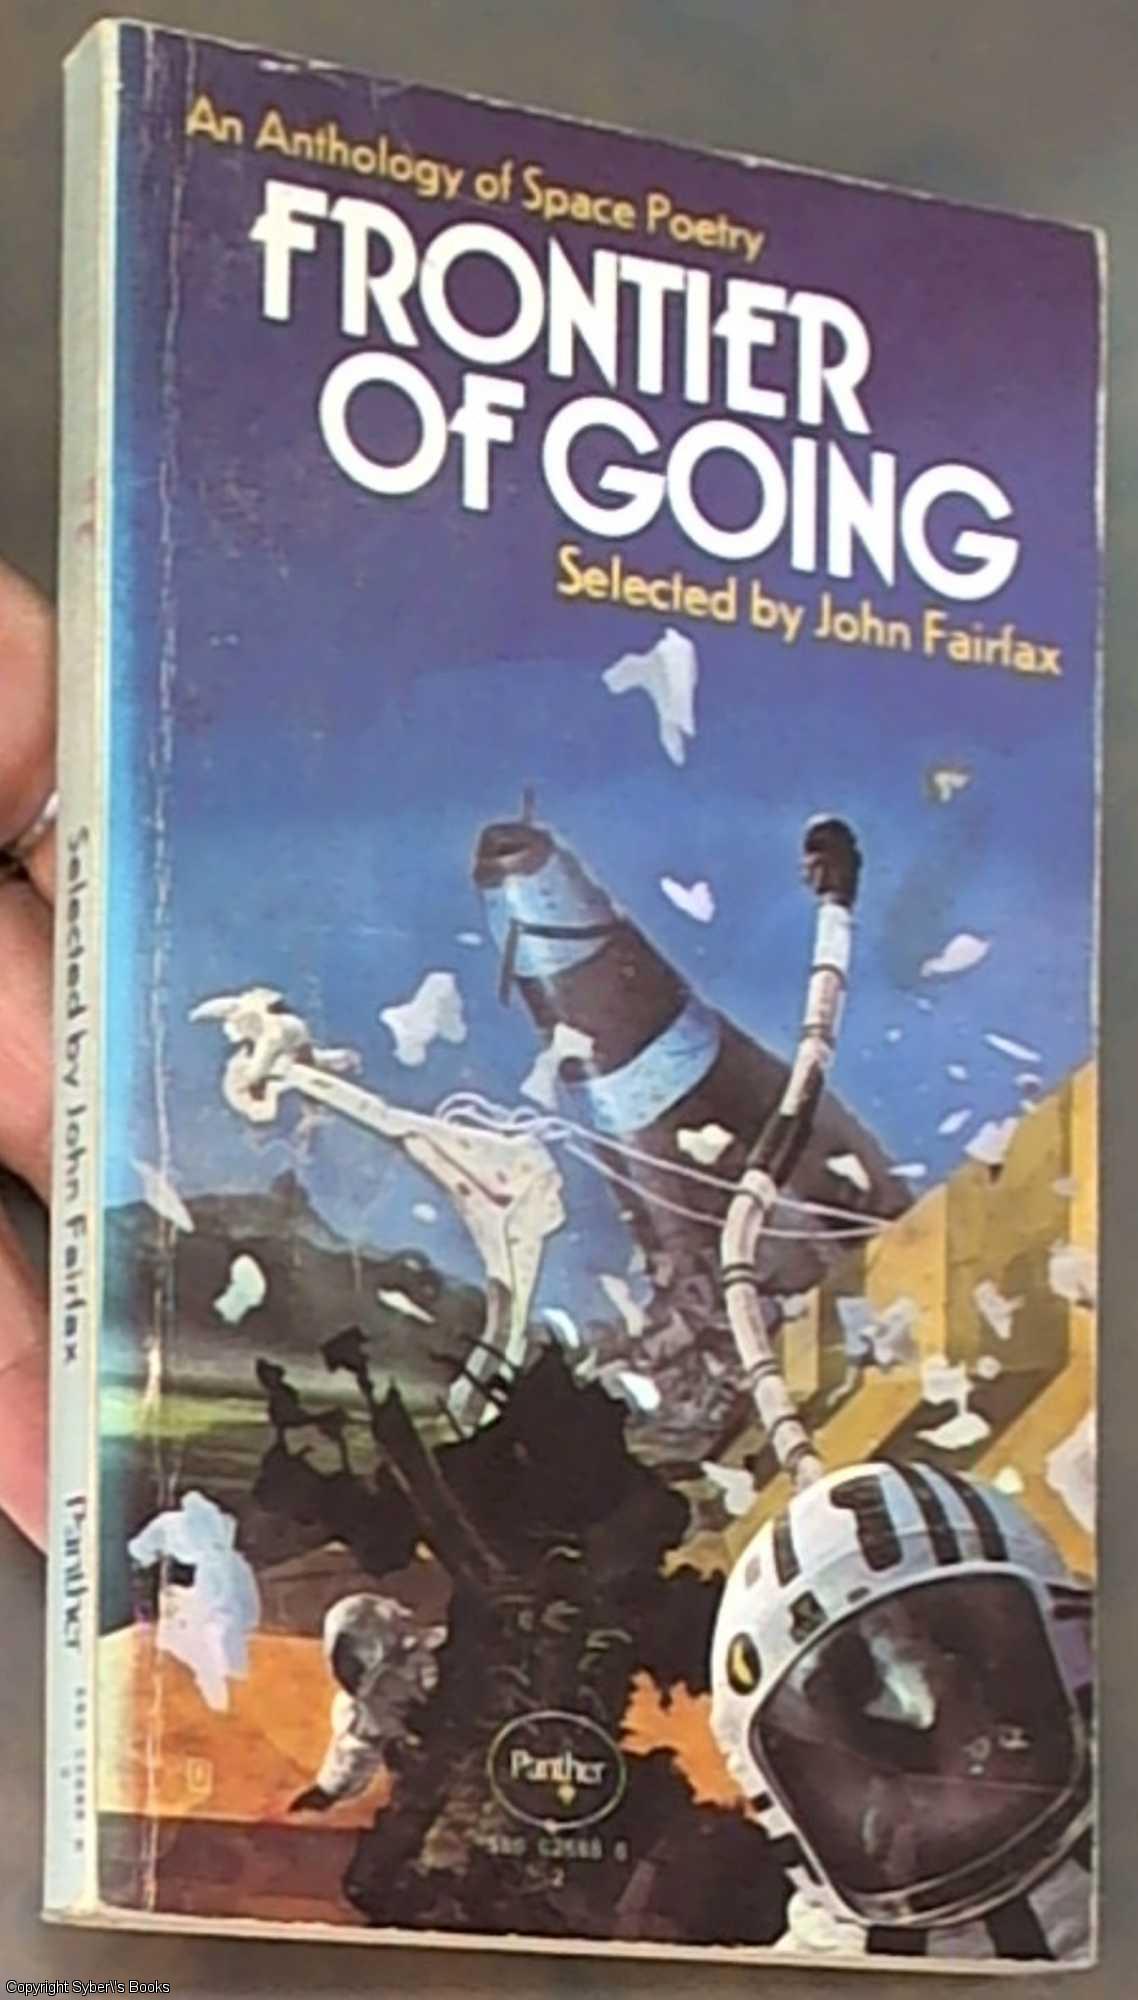 Frontier of Going: An Anthology of Space Poetry - Fairfax, John -- Selector